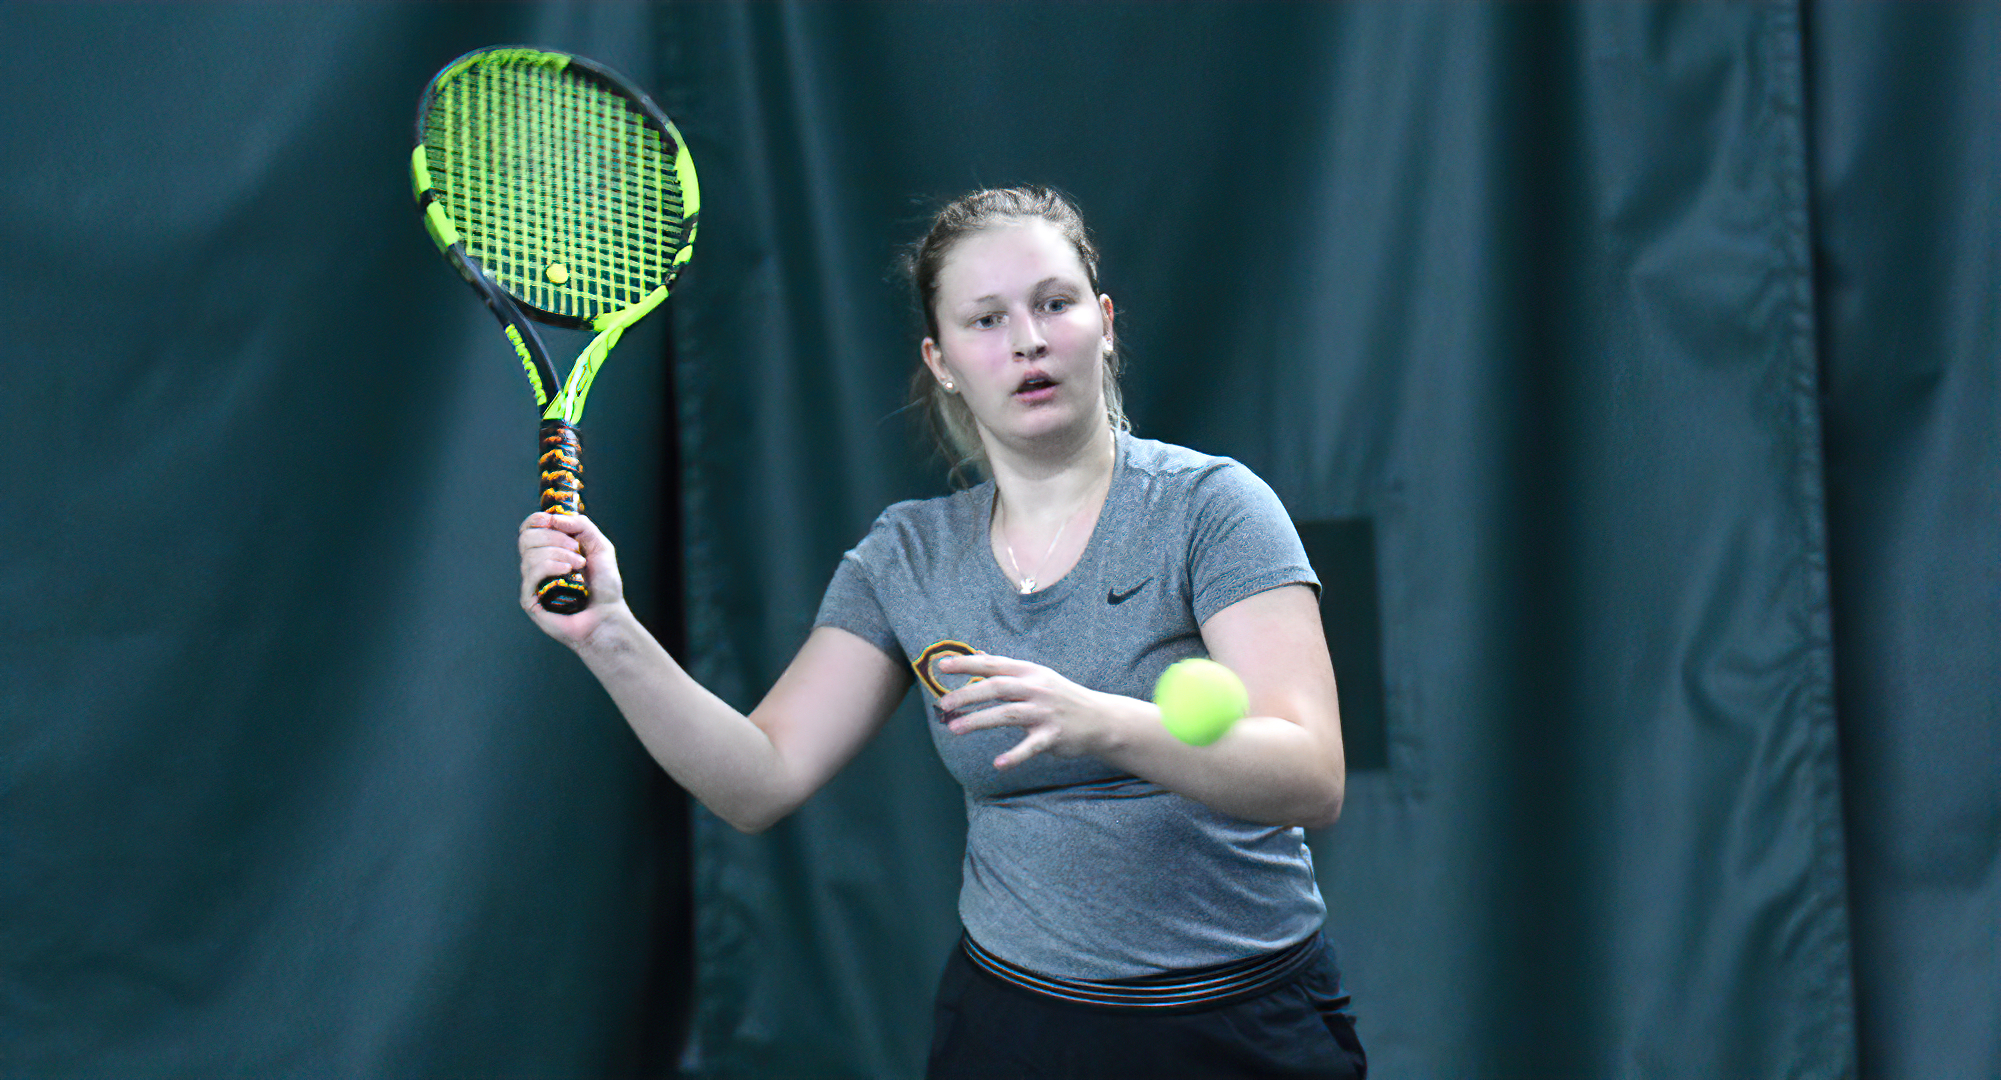 Mary Skorich eyes a forehand return during her singles match vs. St. Mary's. She won 13-11 in the super-set, tie-breaker to earn her fifth win of 2022.